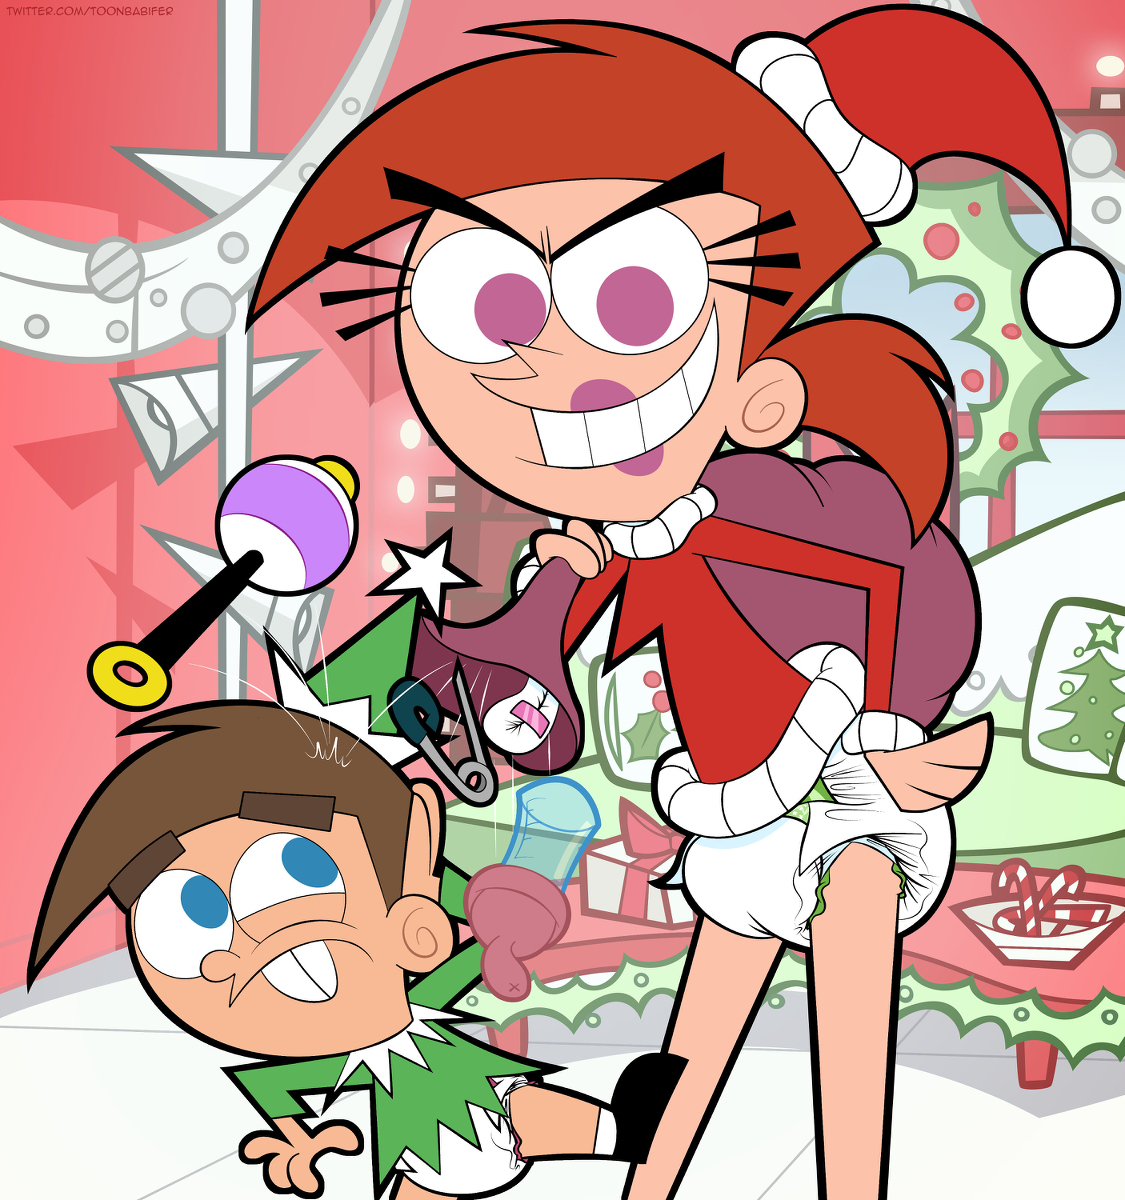 X-Mas Timmy and Vicky #diaper #fairly_oddparents #vicky #timmy_turner https...